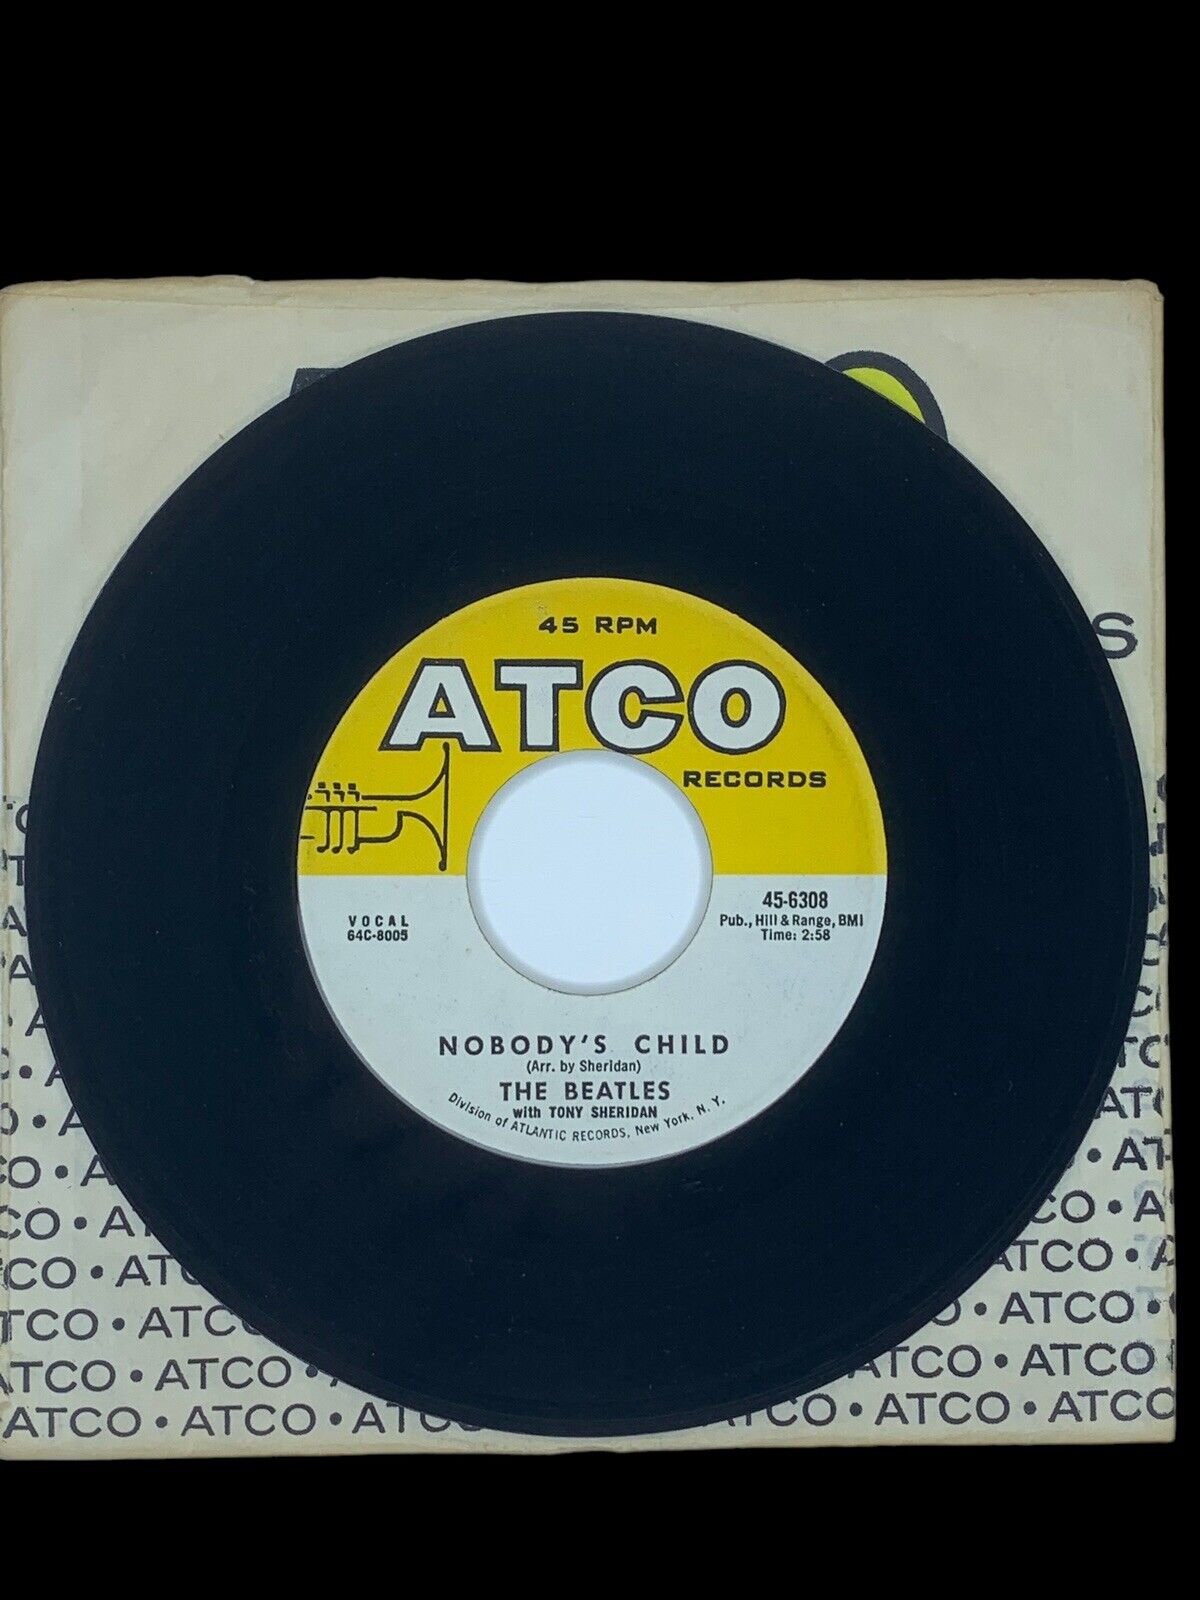 The Beatles – Ain\'t She Sweet 45-6308, ATCO, scarce label variation, US, 1964